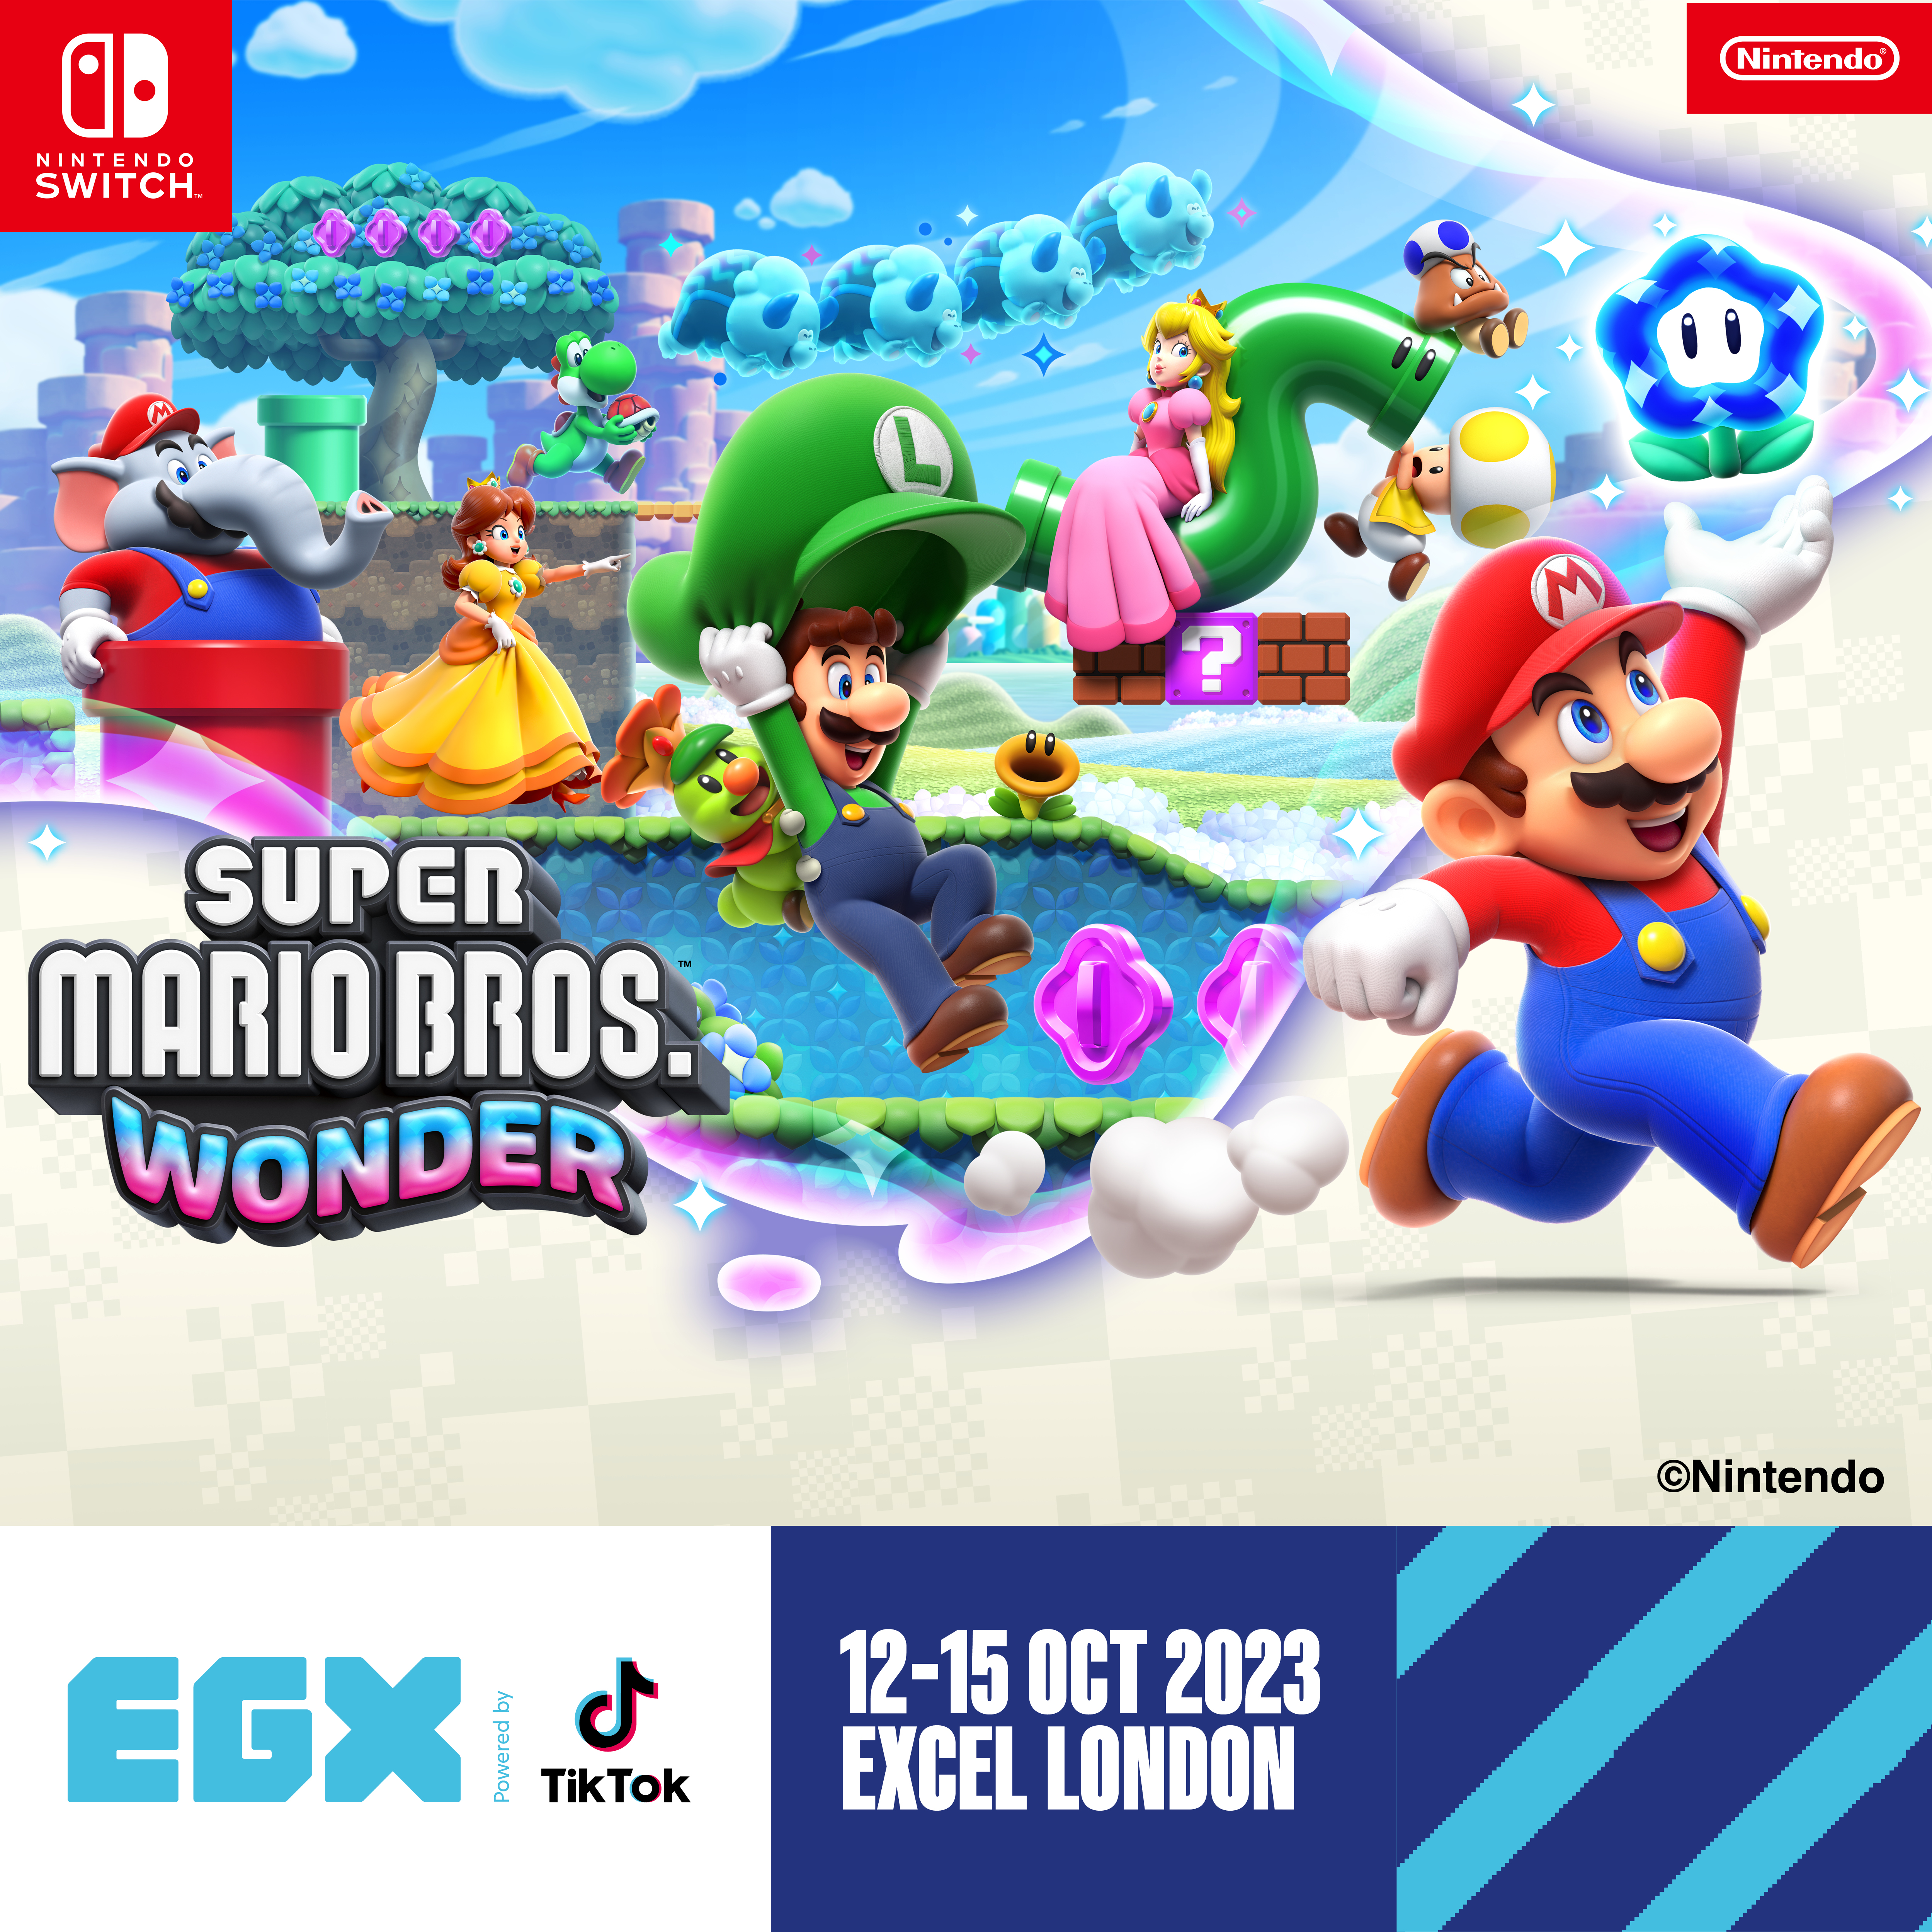 Get hands-on time with Super Mario Bros. Wonder EGX 2023 ahead of its release!